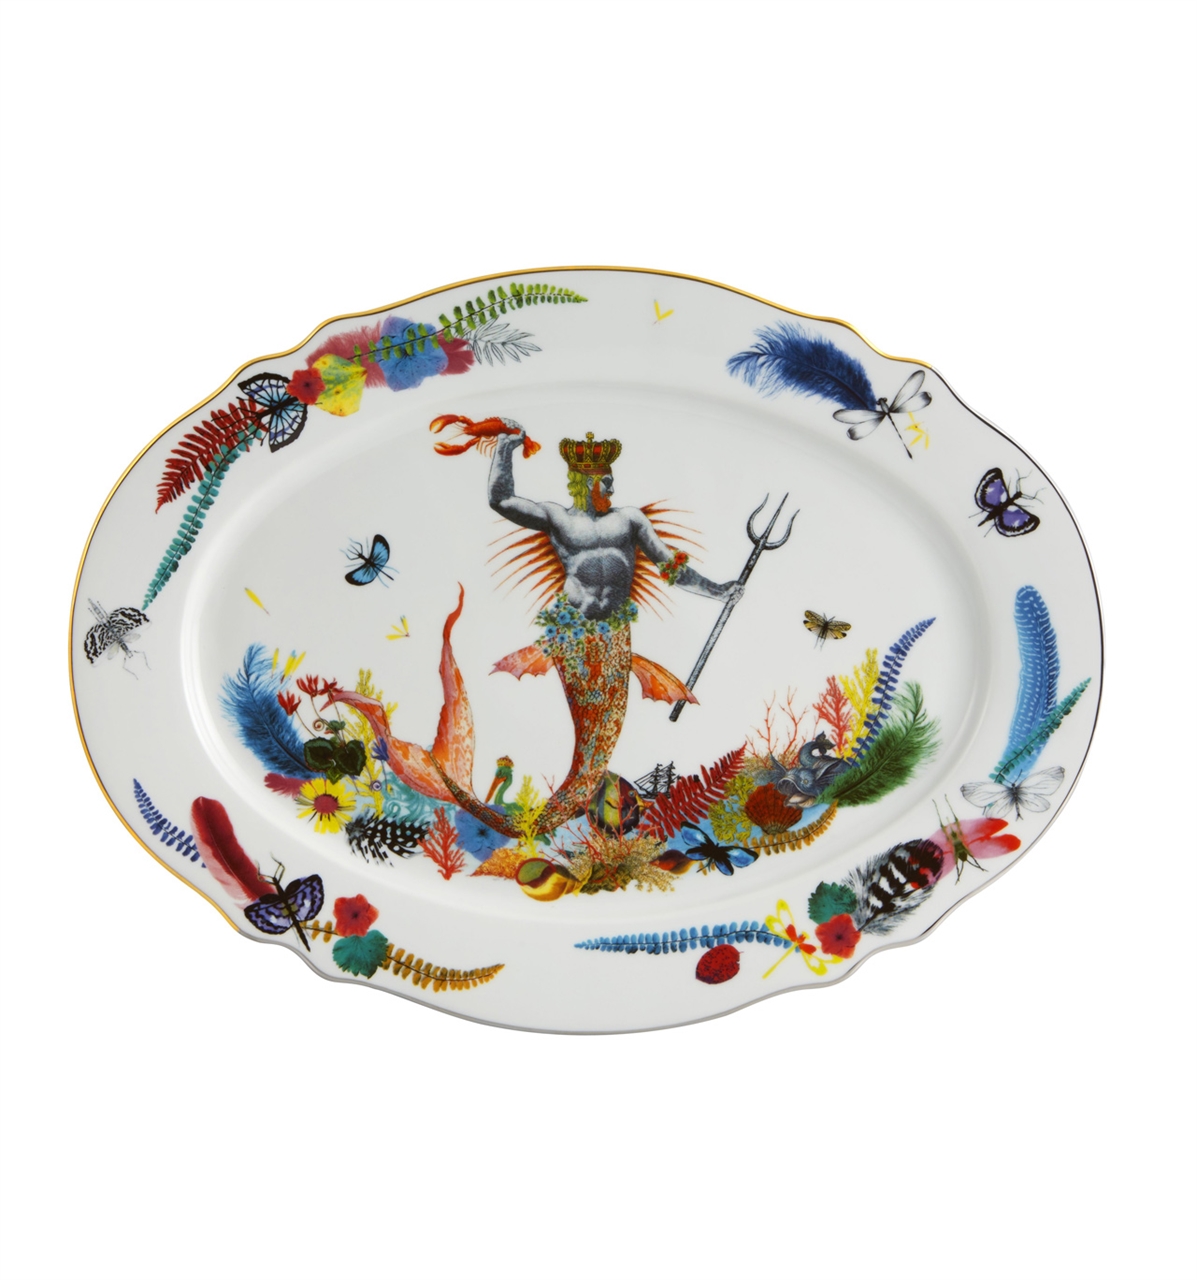 Vista Alegre Collection Caribe medium oval platter by Christian Lacroix